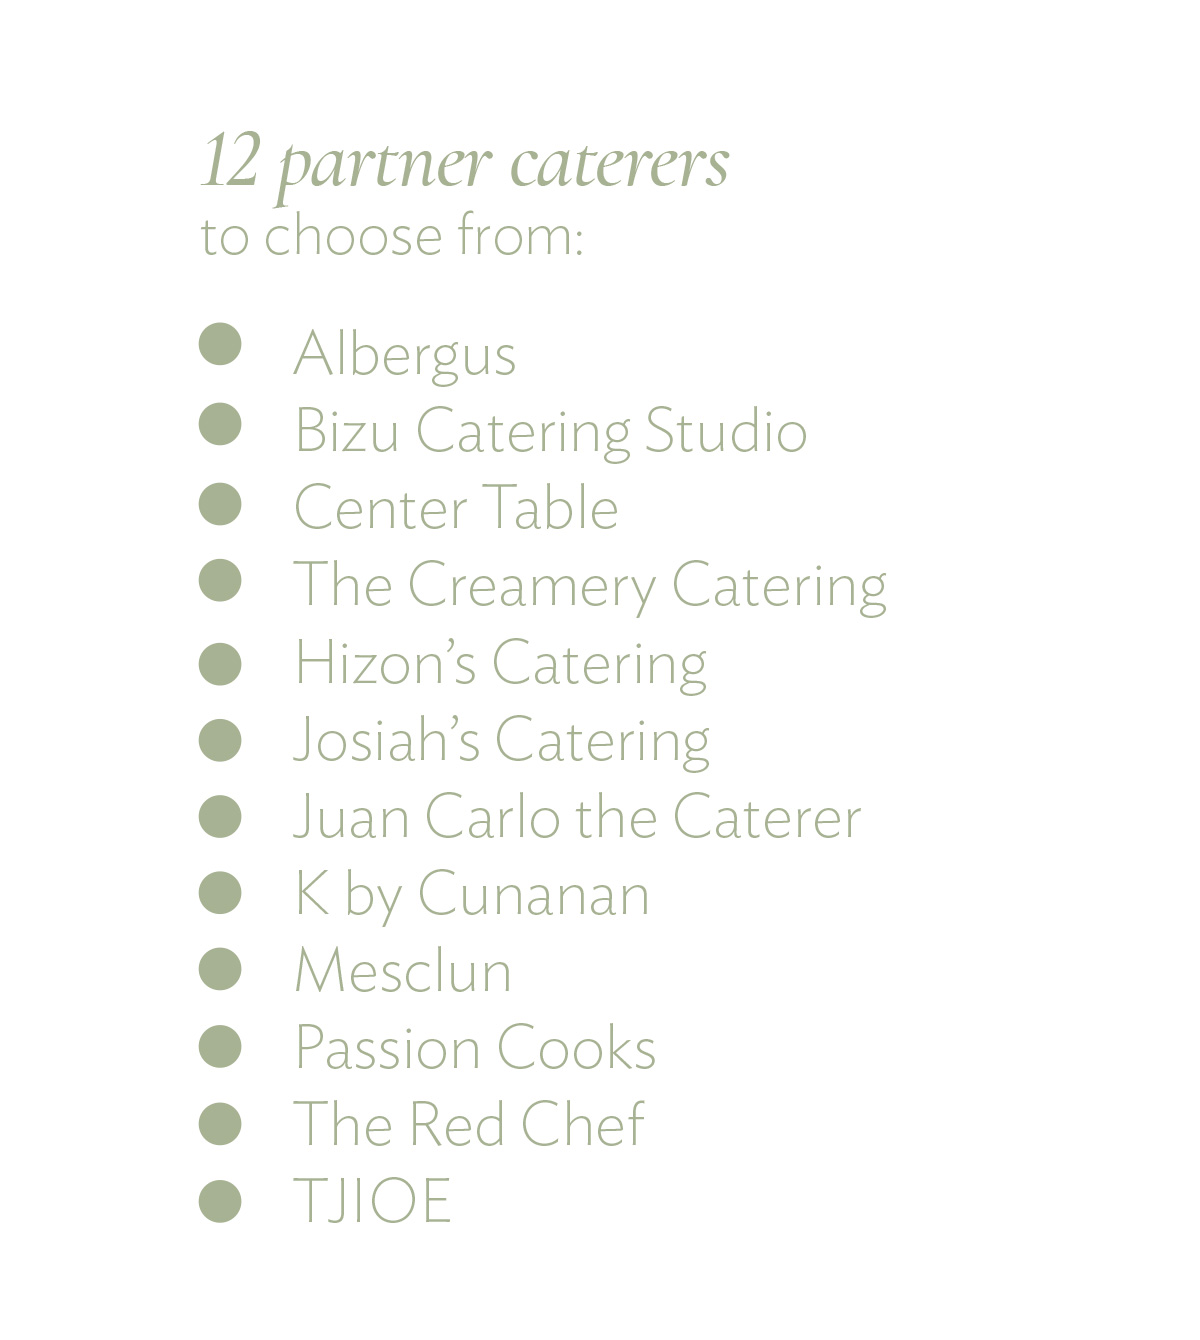 12 partner caterers